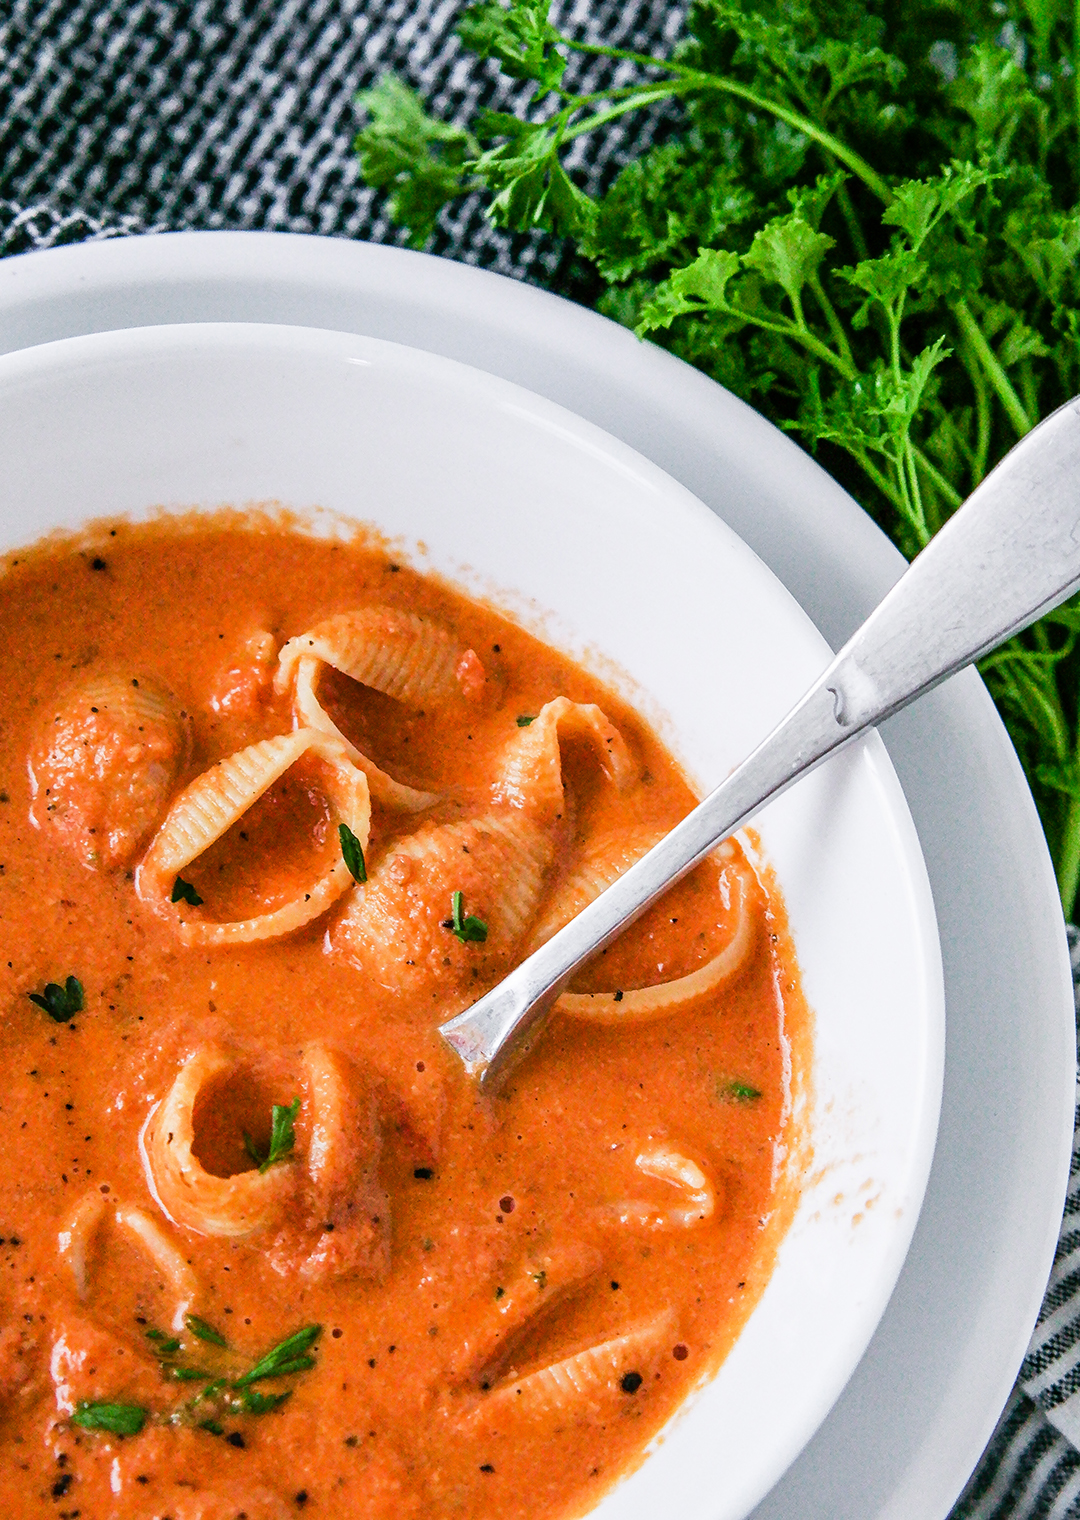 Polonaise Soup (Tomato Soup with Cheddar and Pasta) - Candy Jar Chronicles